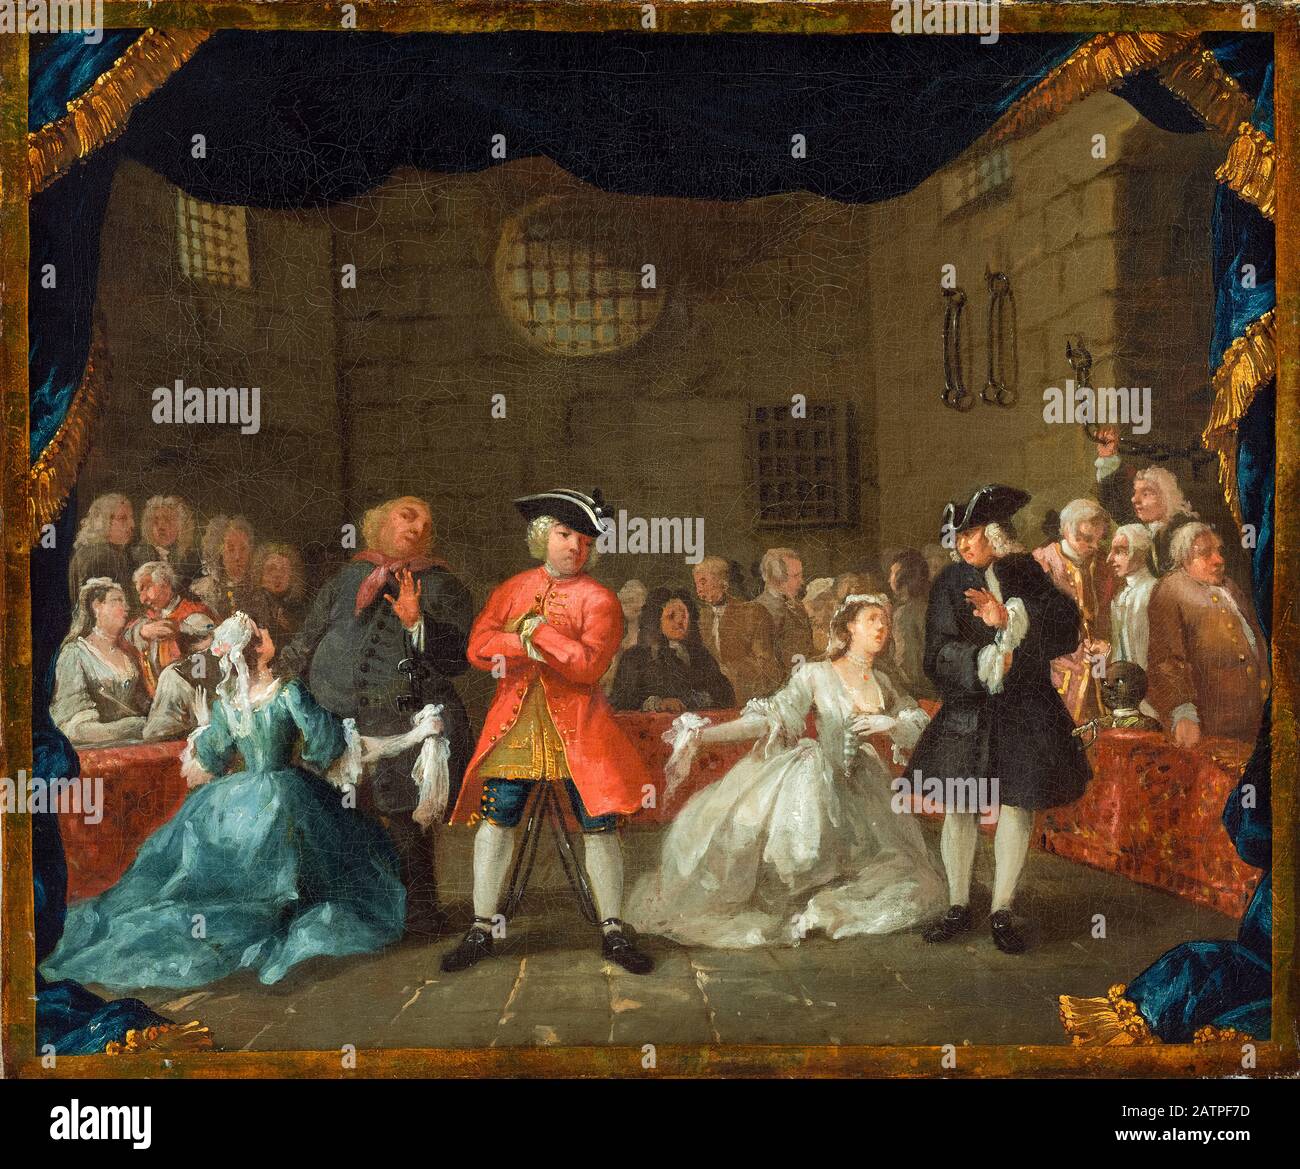 A Scene from The Beggar's Opera, painting by William Hogarth, 1728-1729 Stock Photo